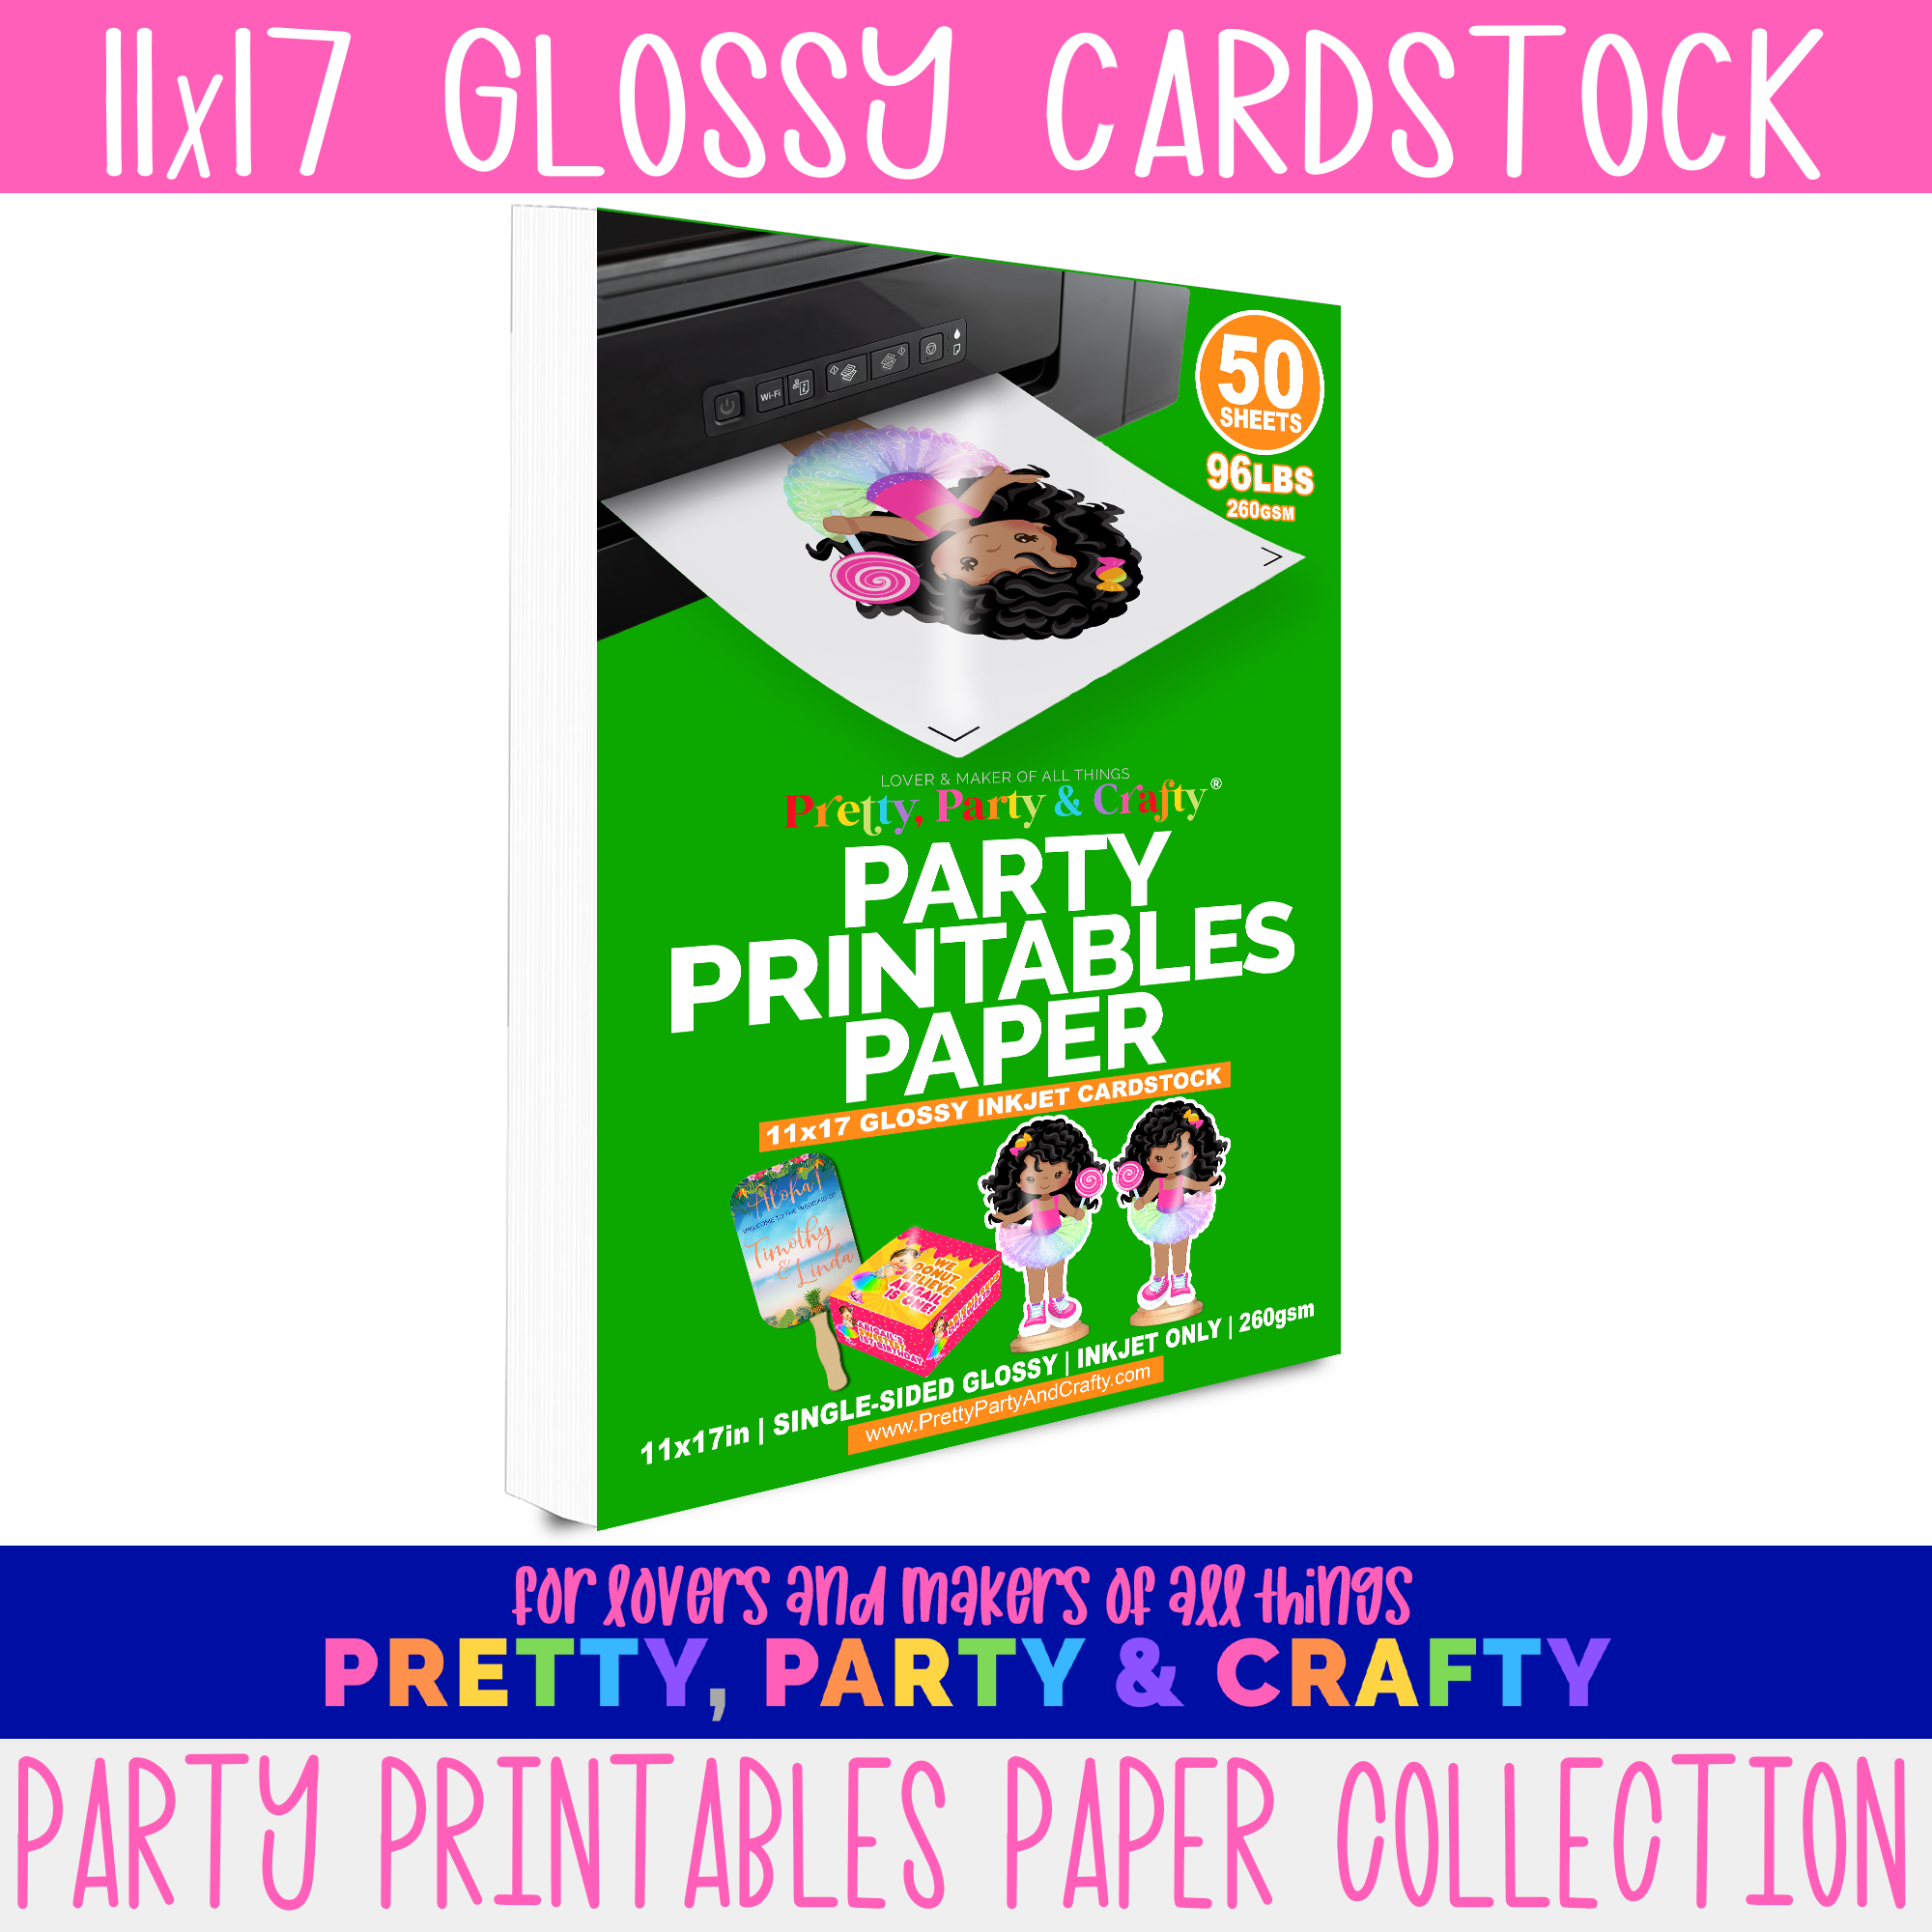 11x17-glossy-cardstock-inkjet-only-pretty-party-and-crafty